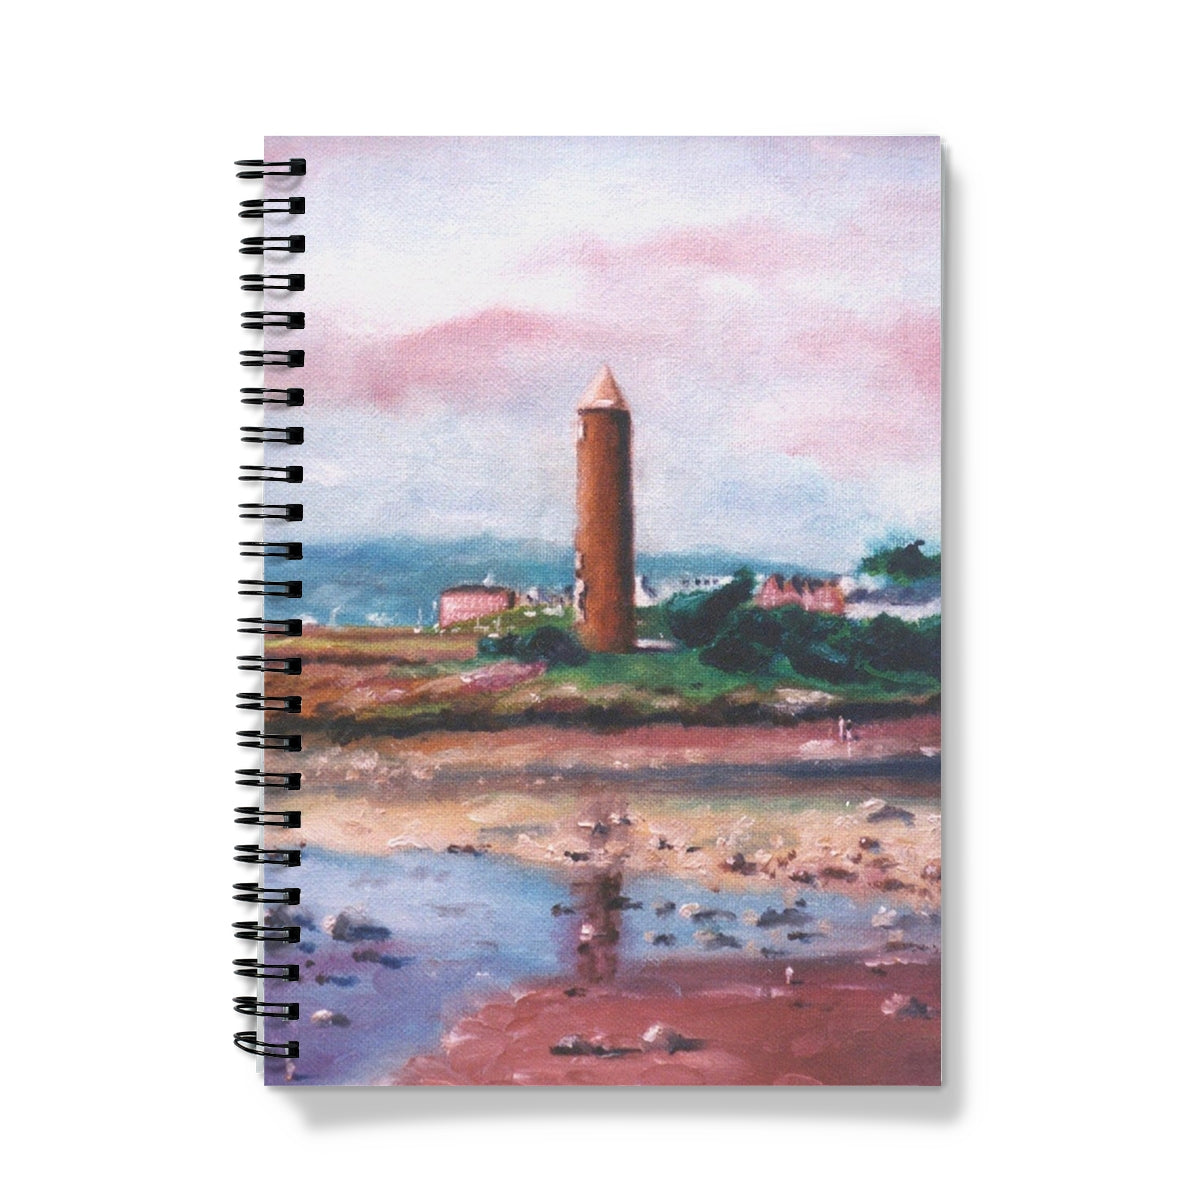 Pencil Point Largs Art Gifts Notebook-Journals & Notebooks-River Clyde Art Gallery-A5-Graph-Paintings, Prints, Homeware, Art Gifts From Scotland By Scottish Artist Kevin Hunter